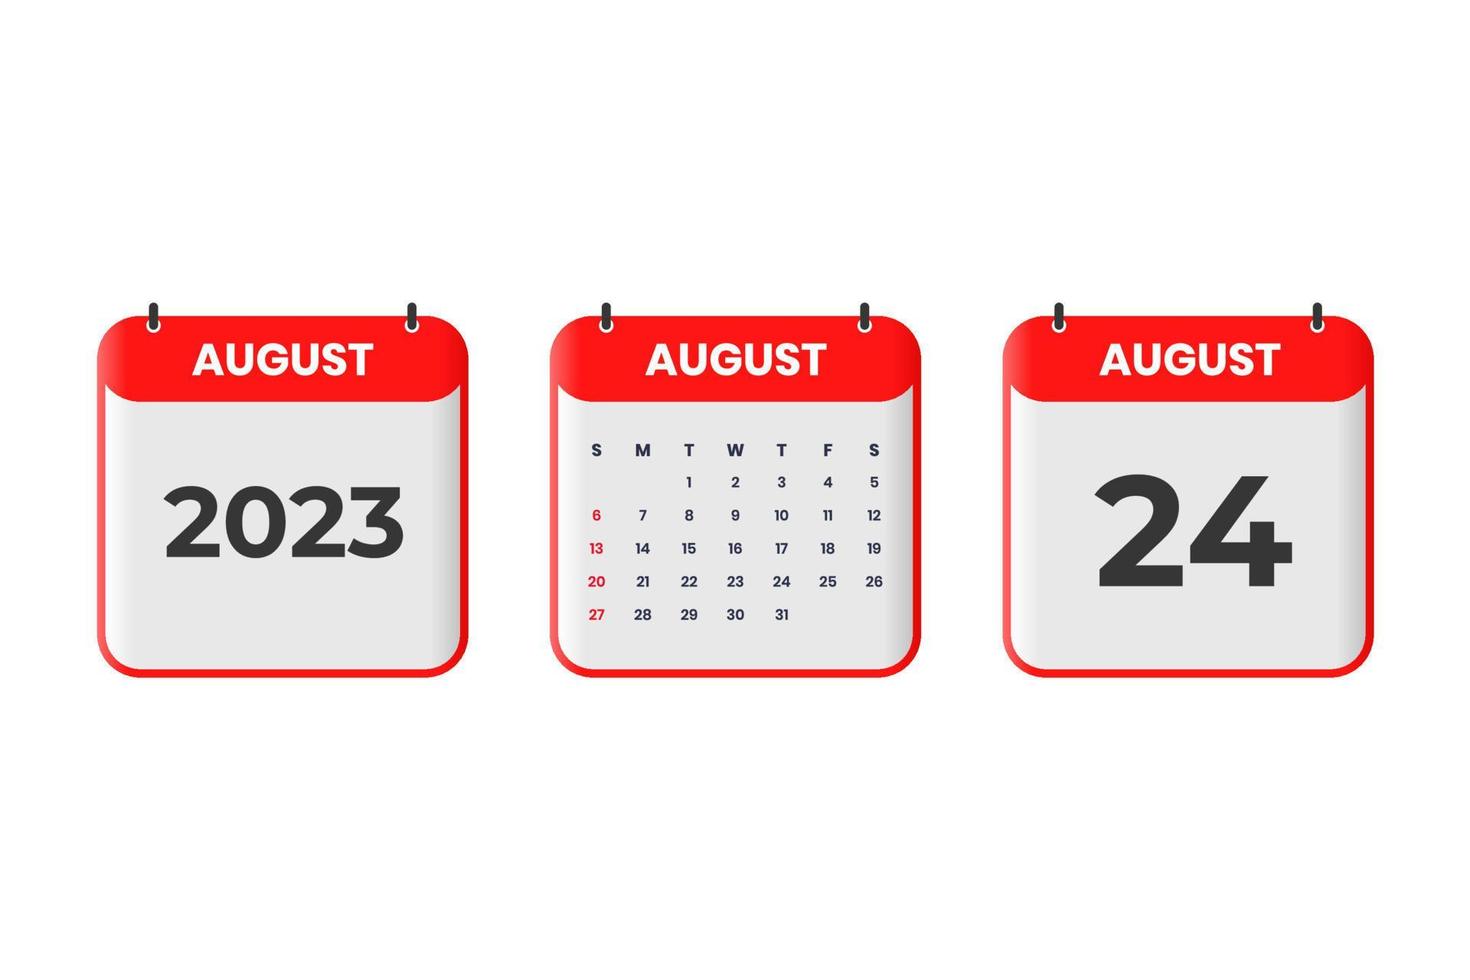 August 2023 calendar design. 24th August 2023 calendar icon for schedule, appointment, important date concept vector